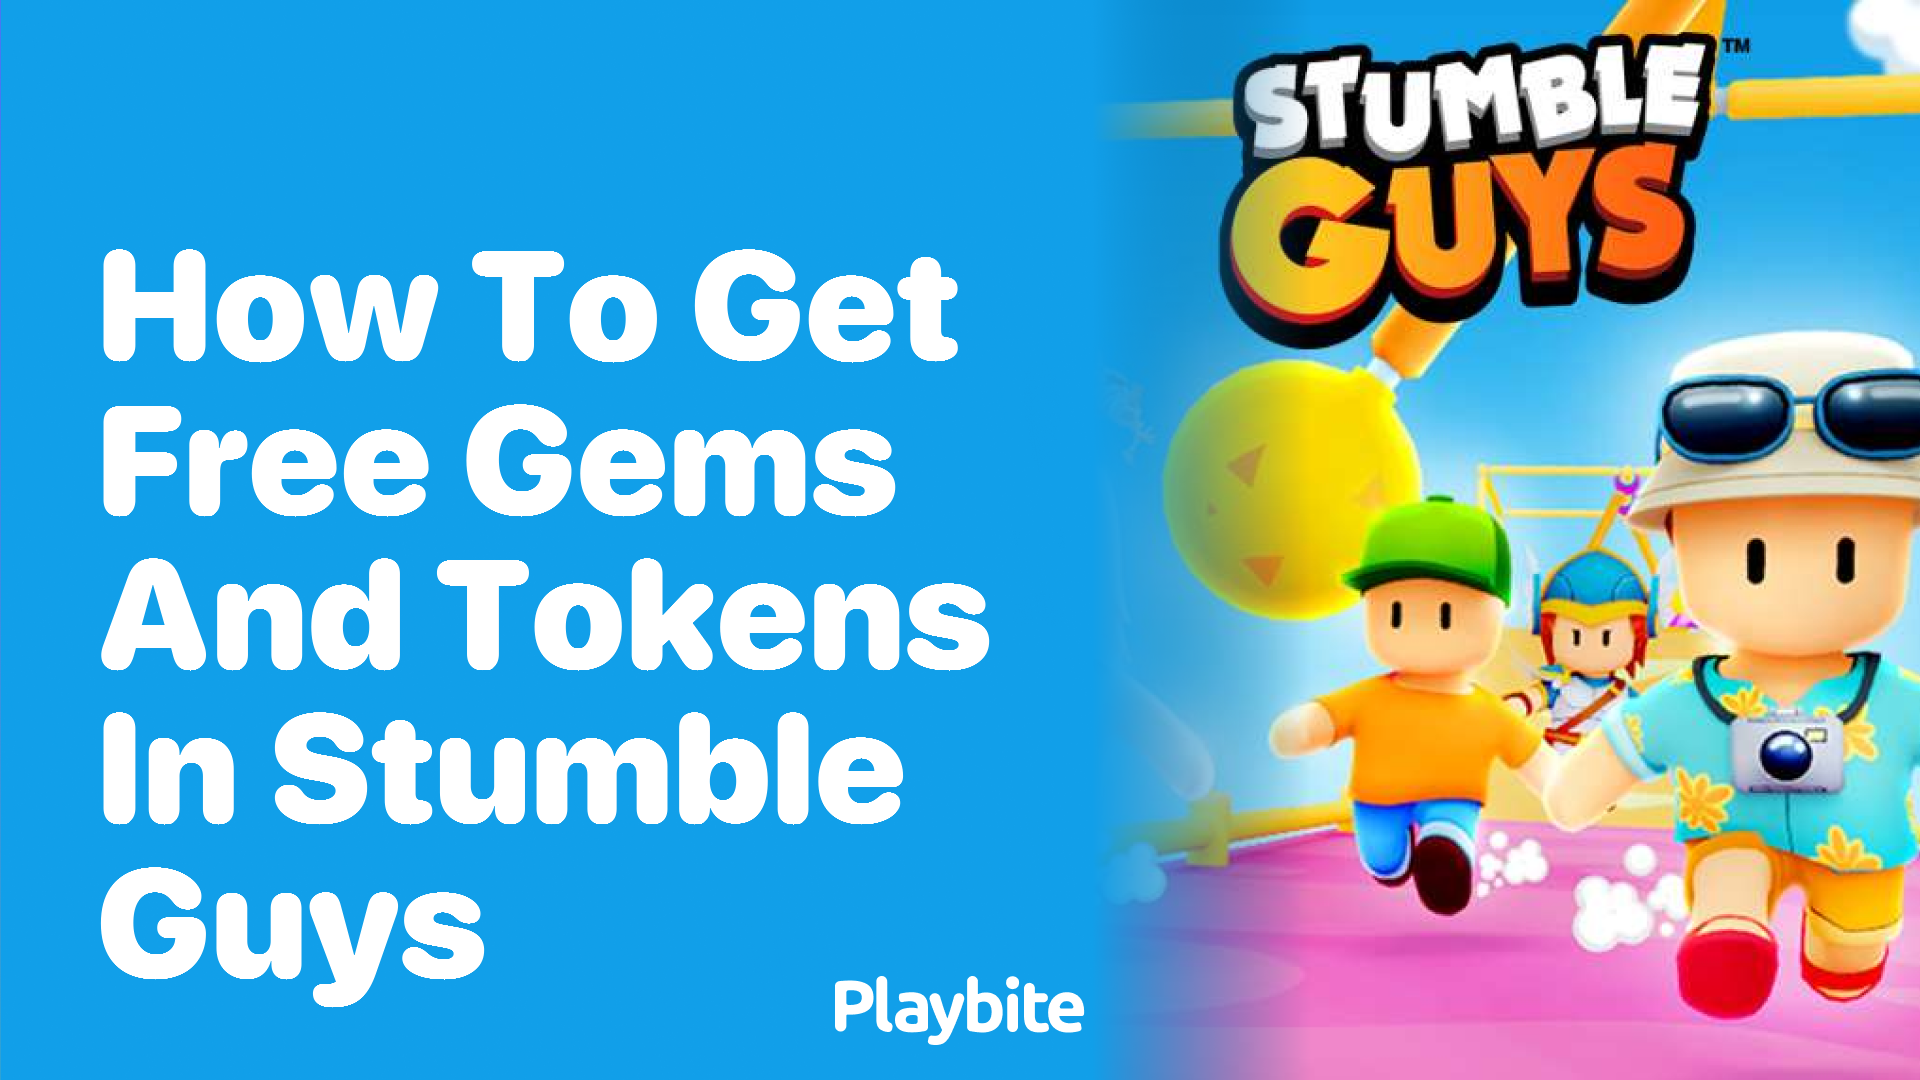 How to Get Free Gems and Tokens in Stumble Guys